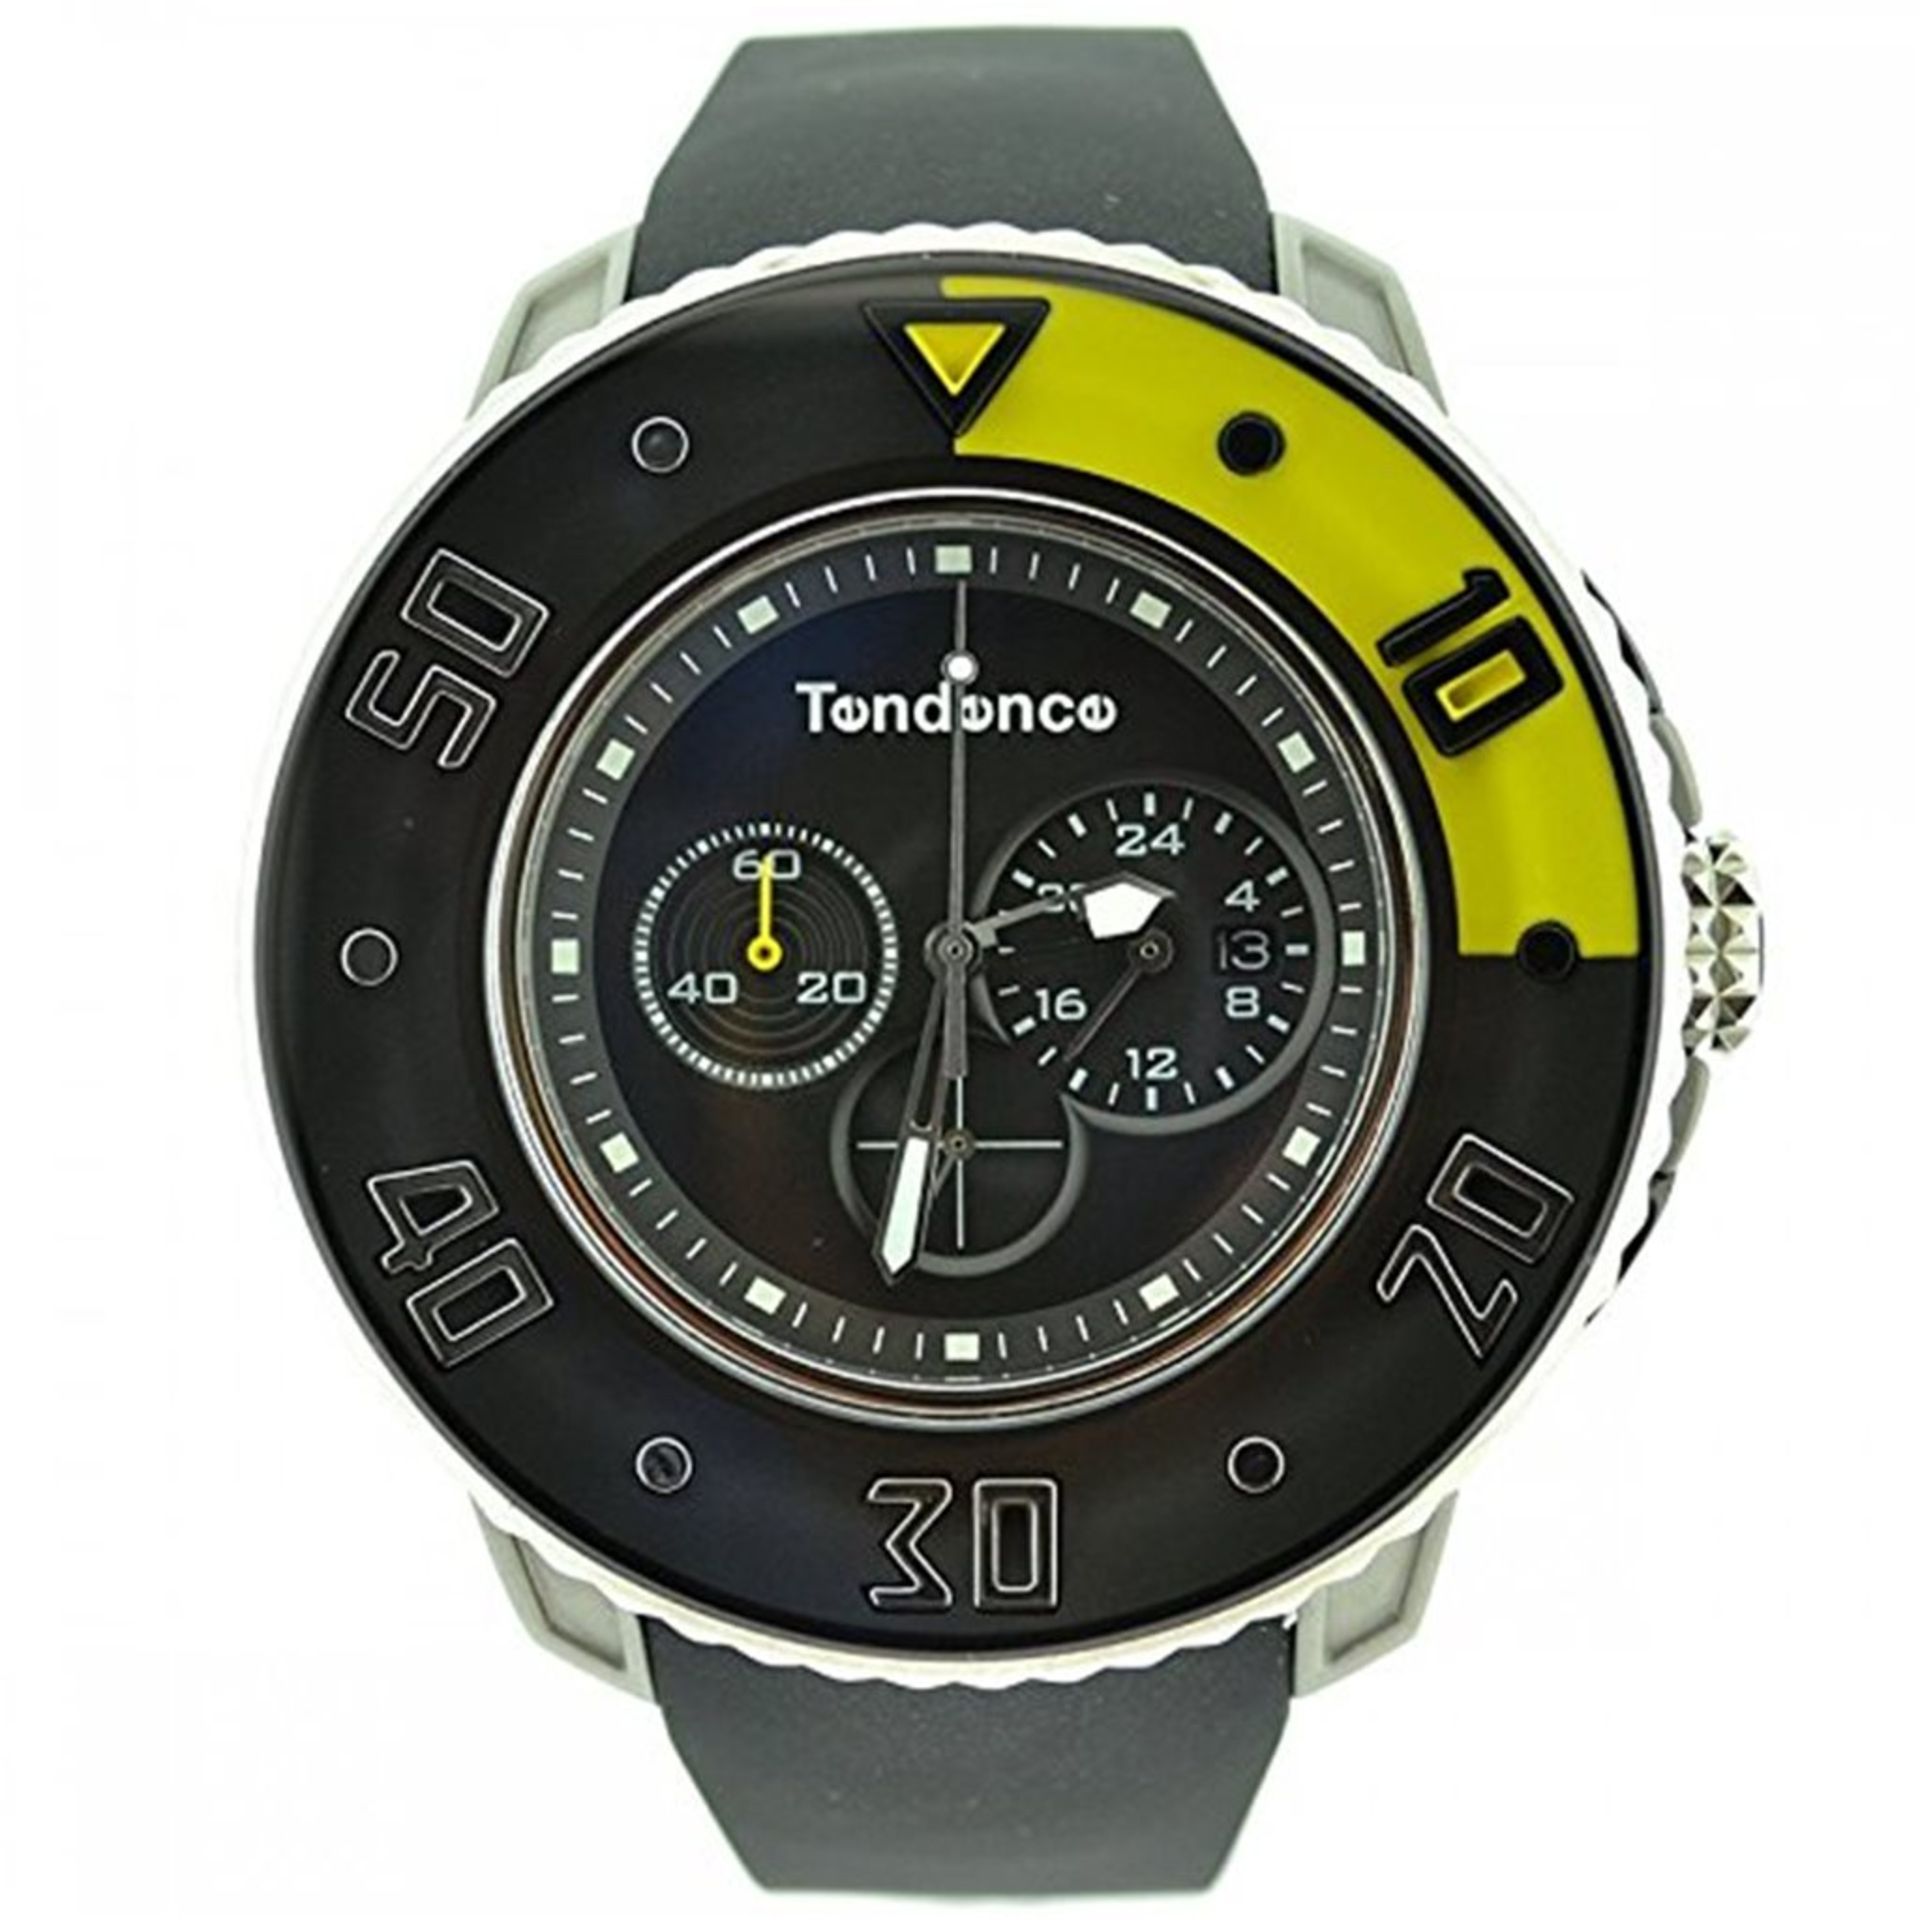 Tendence G-52 Unisex Quartz Watch with Black Dial Analogue Display and Black Plastic or PU Strap 210 - Image 5 of 6